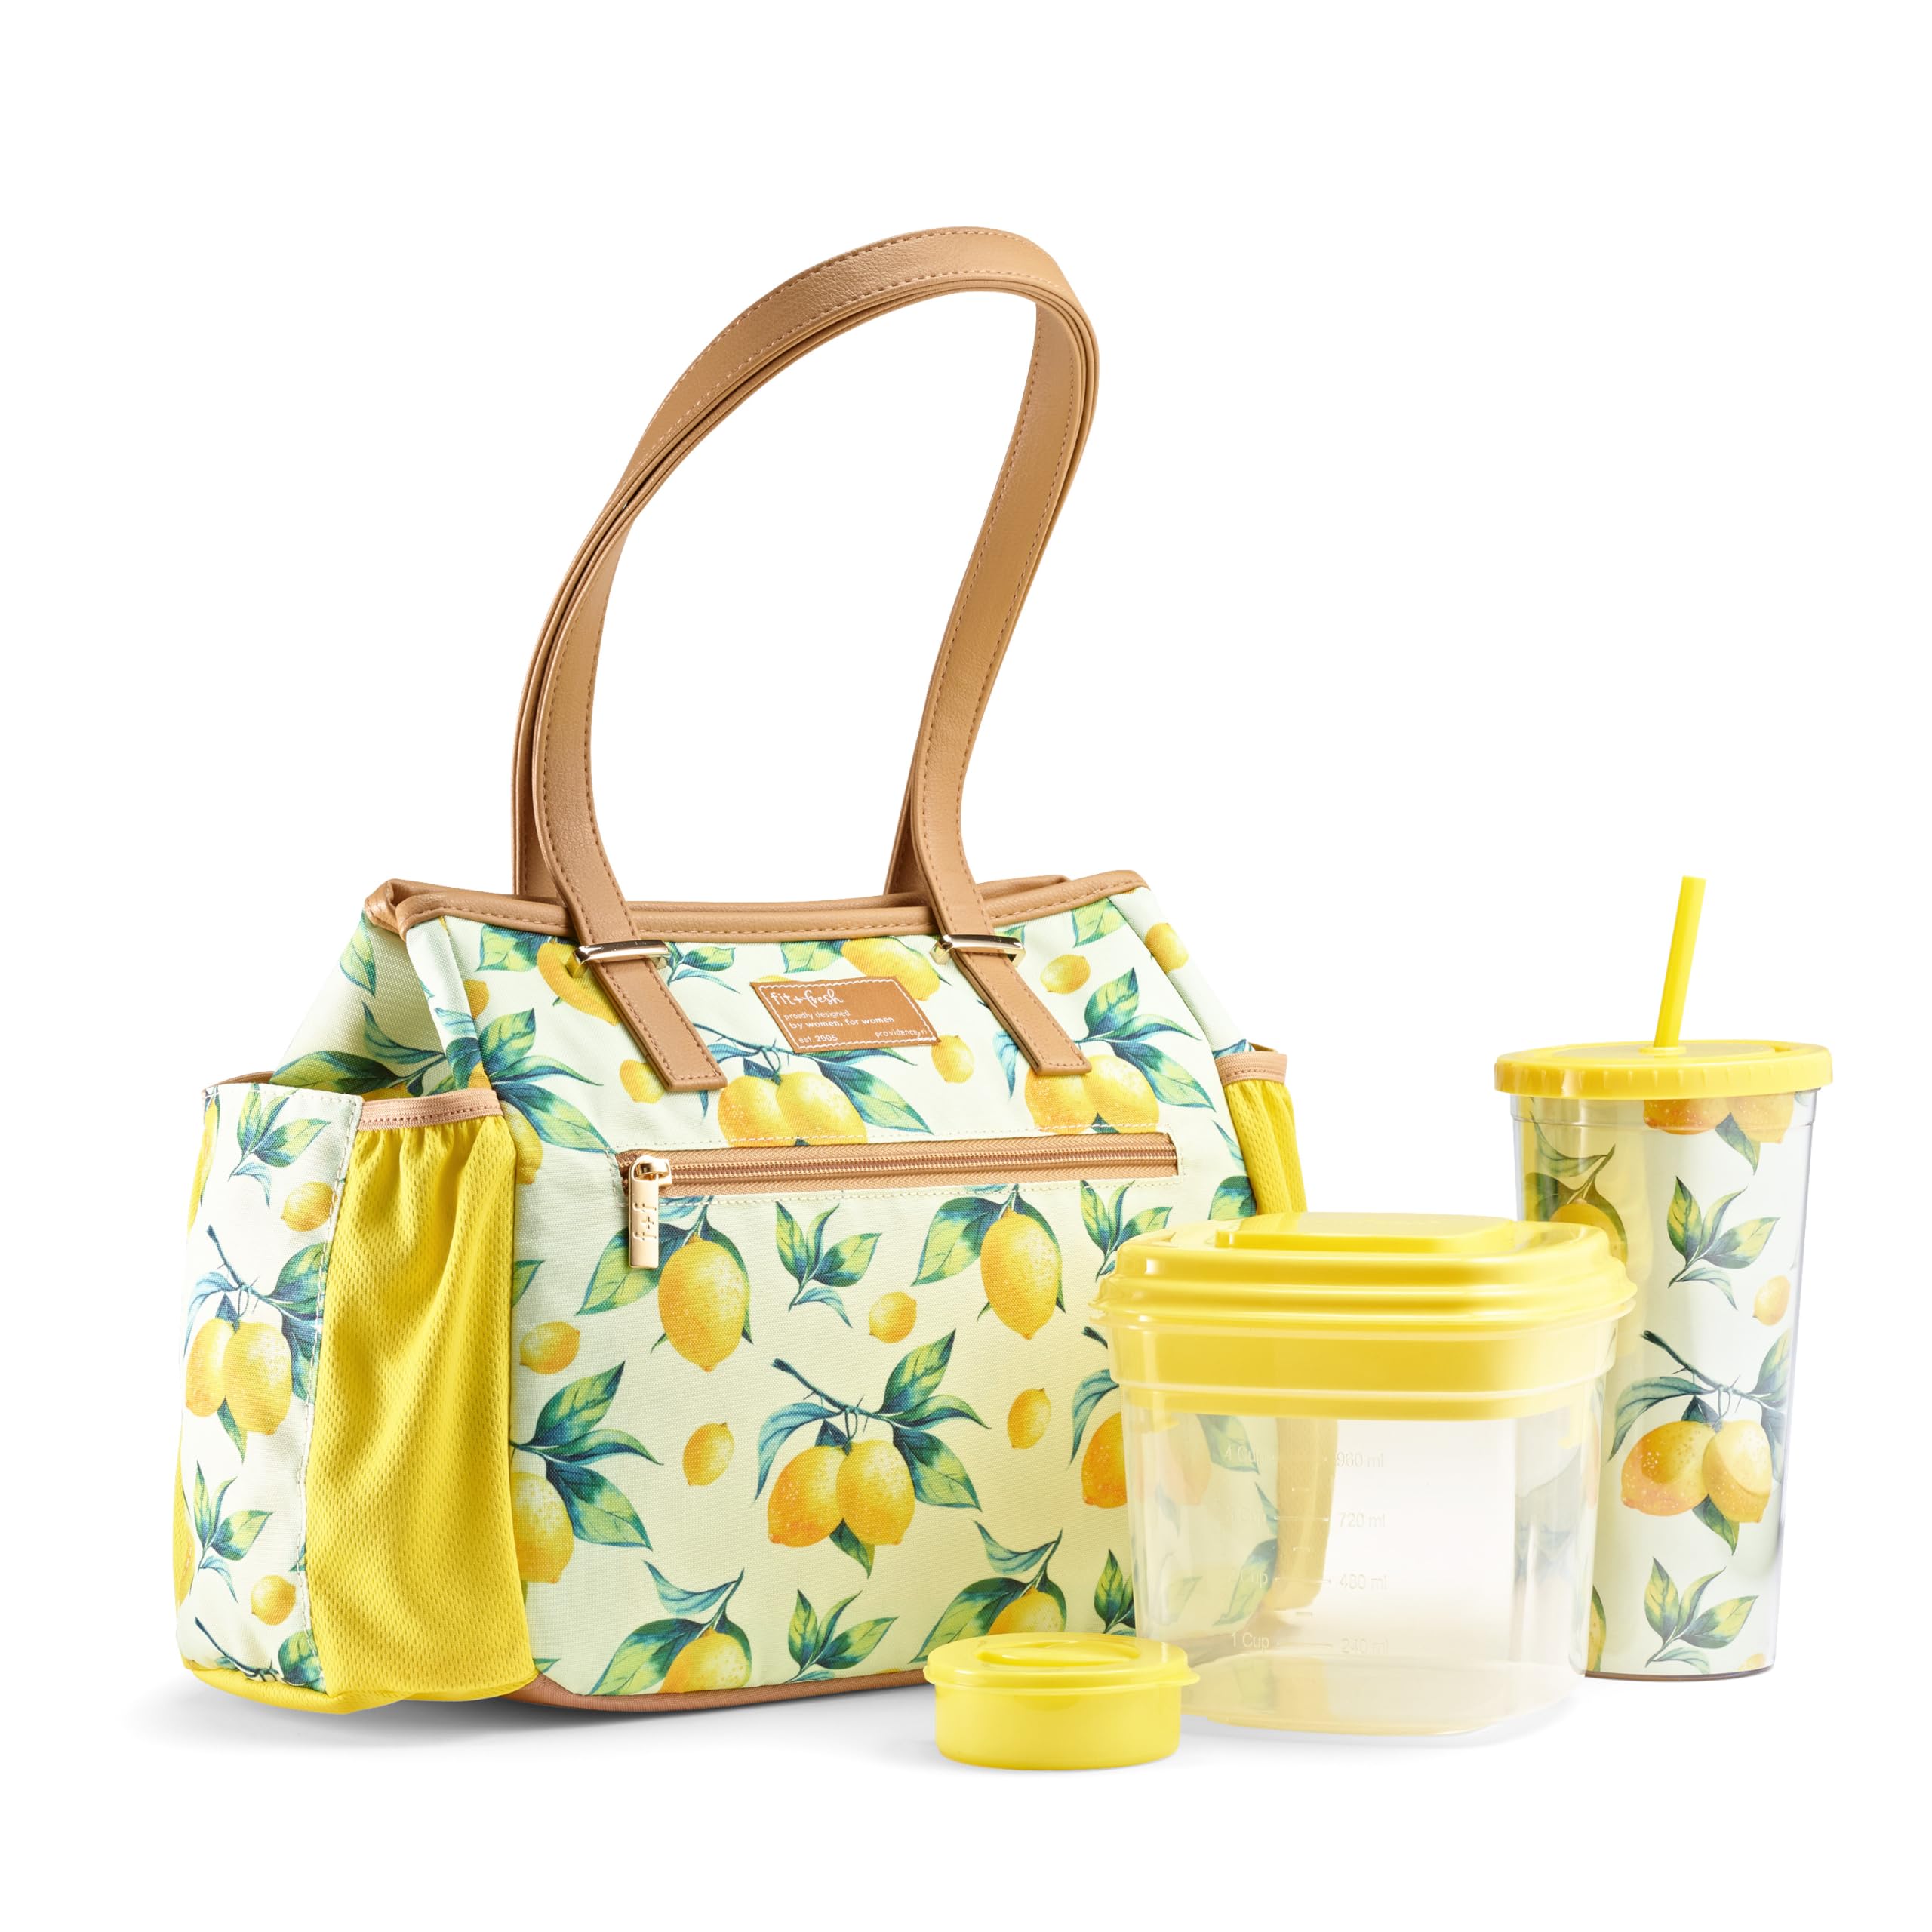 FOUNDRY 2900FFSC3000 LEMON SPRING DELUXE LUNCH TOTE BAG